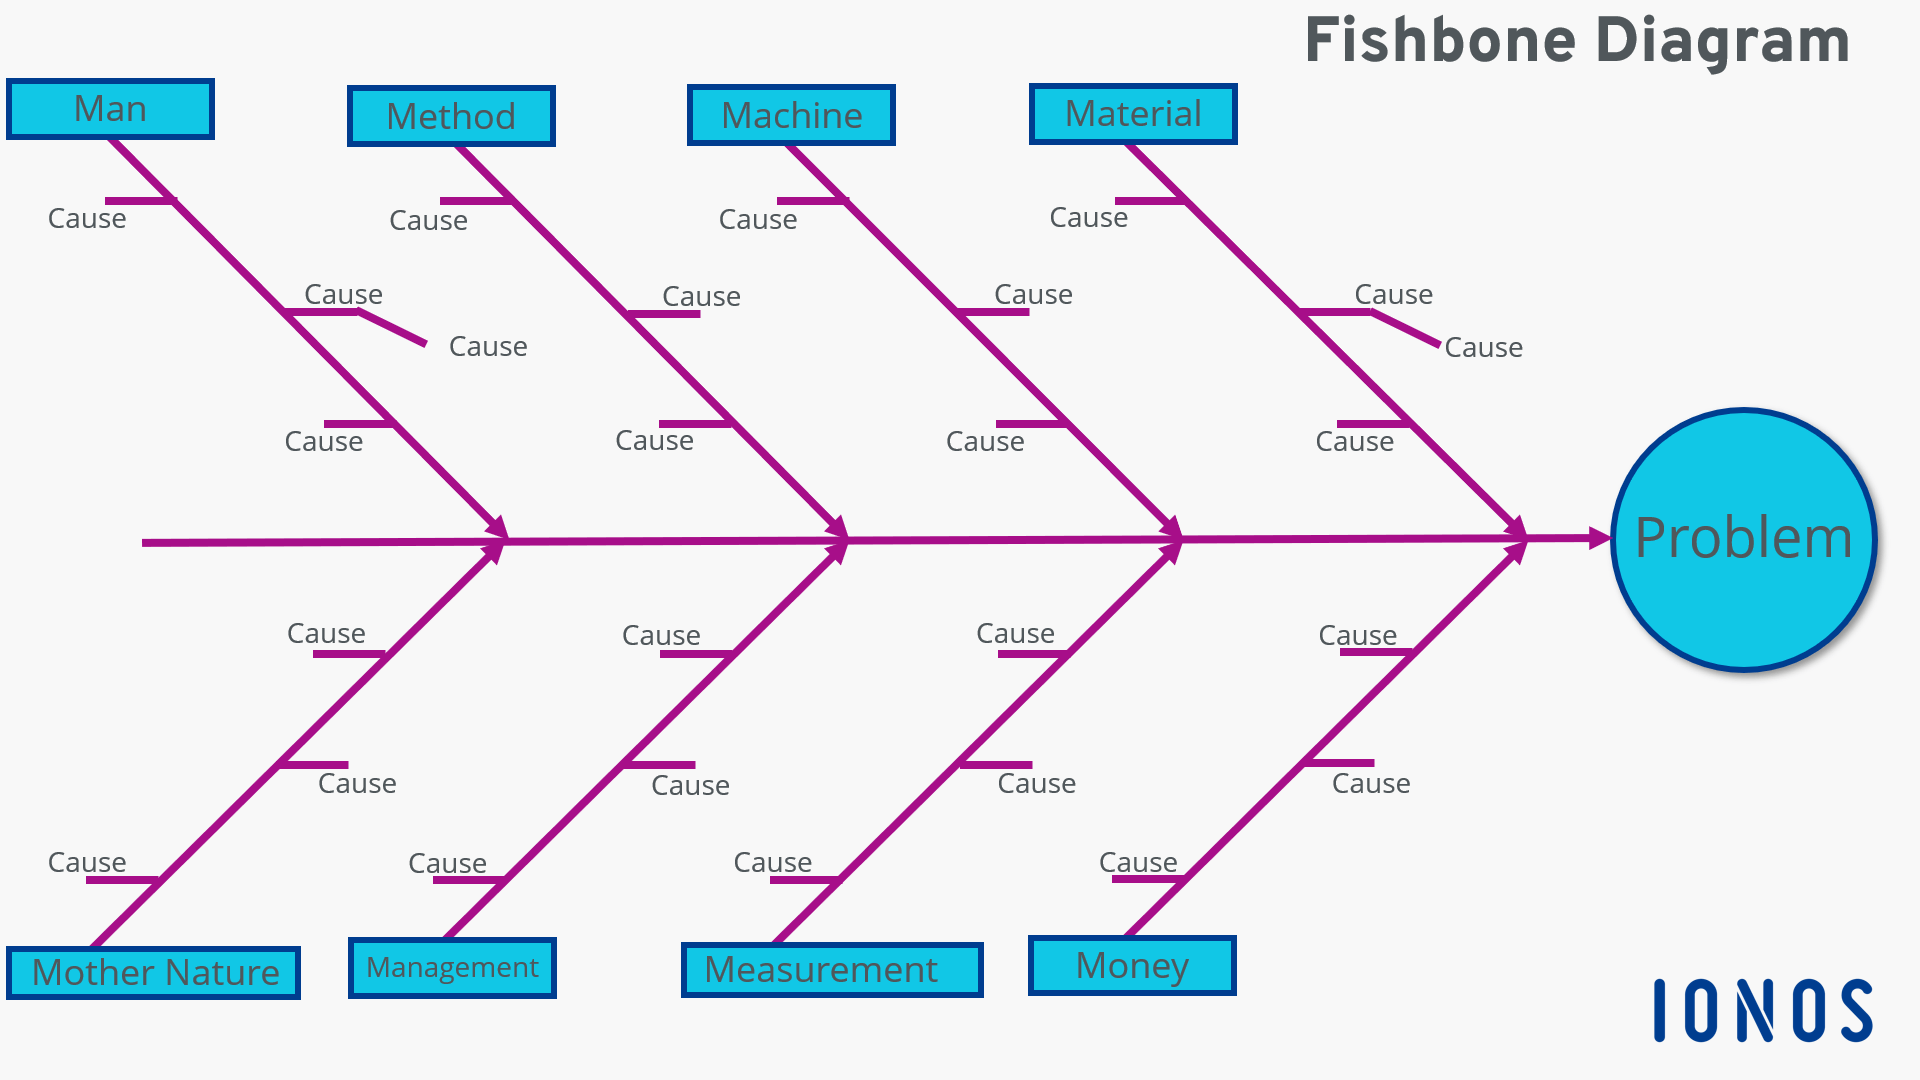 Example of a fishbone diagram